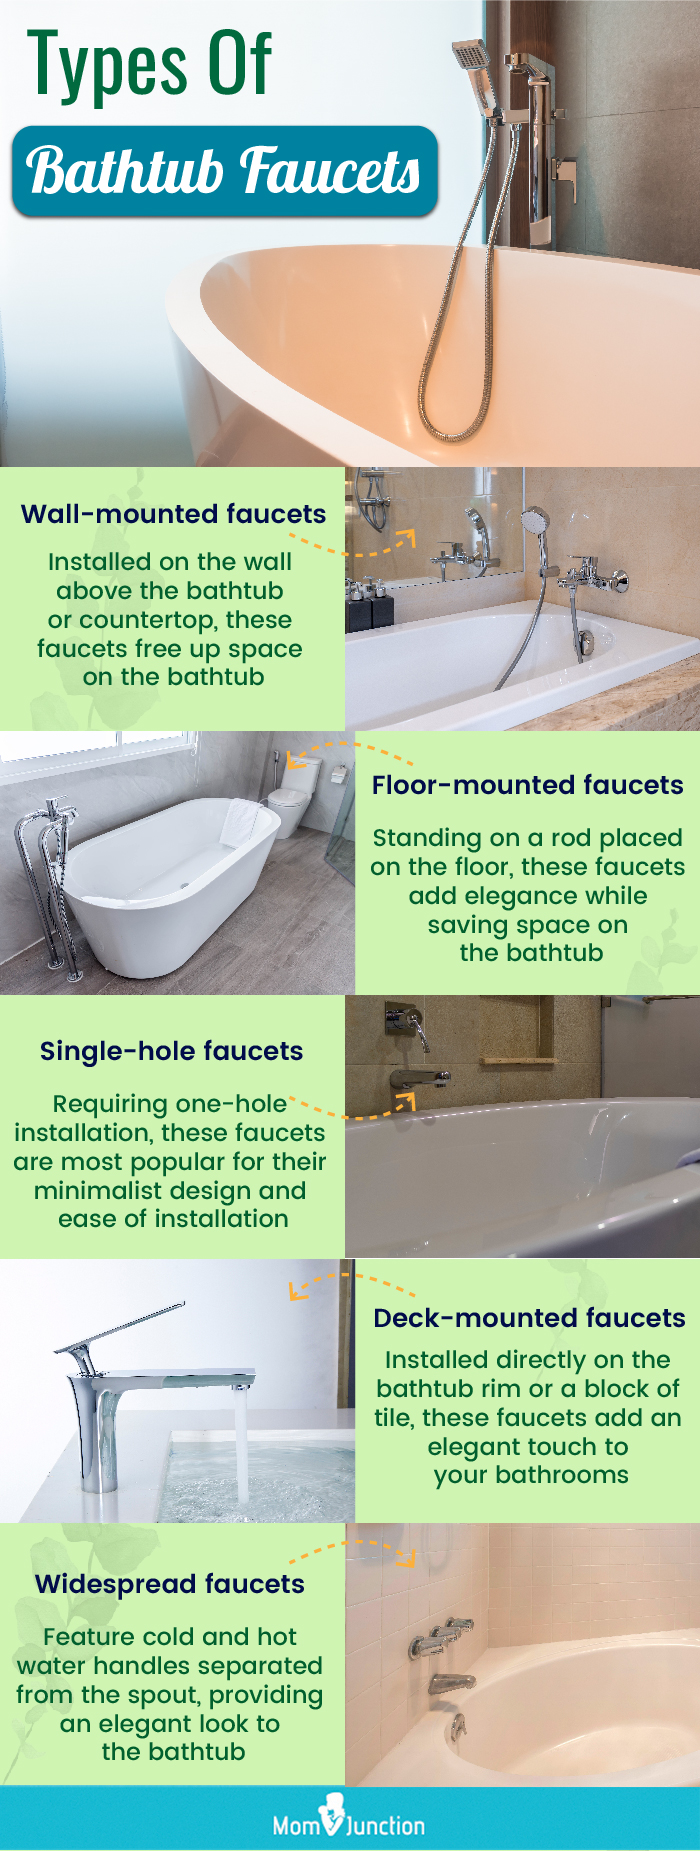 Types Of Bathtub Faucets (infographic)